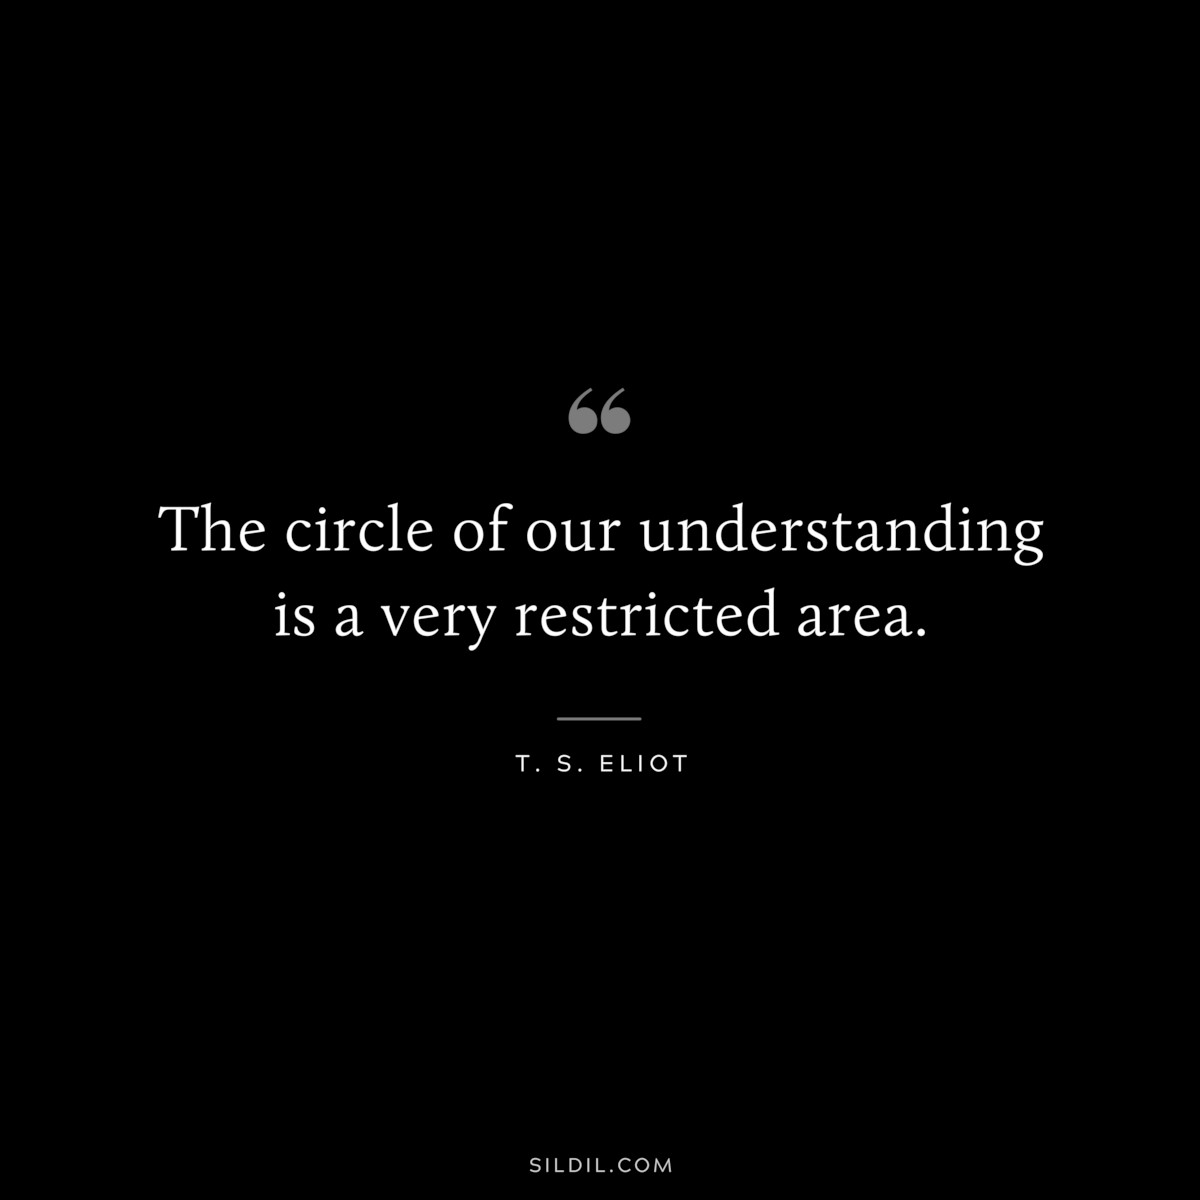 The circle of our understanding is a very restricted area. ― T. S. Eliot